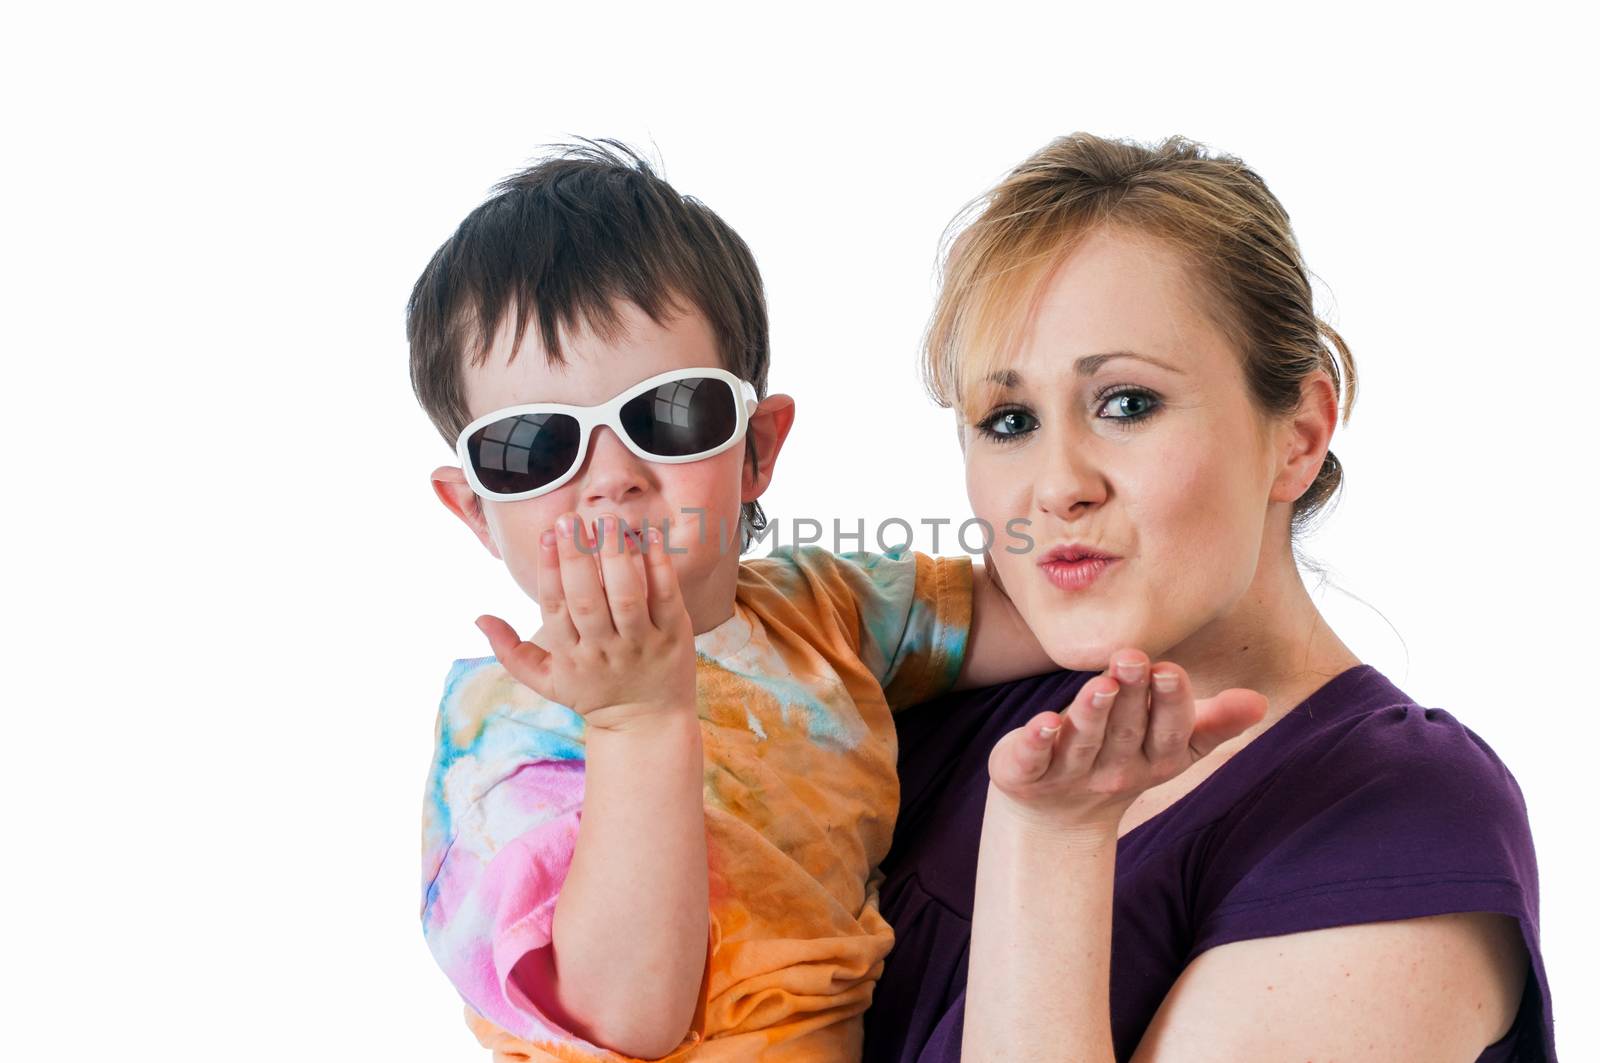 Pretty young woman holding a three year old boy blowing kisses.